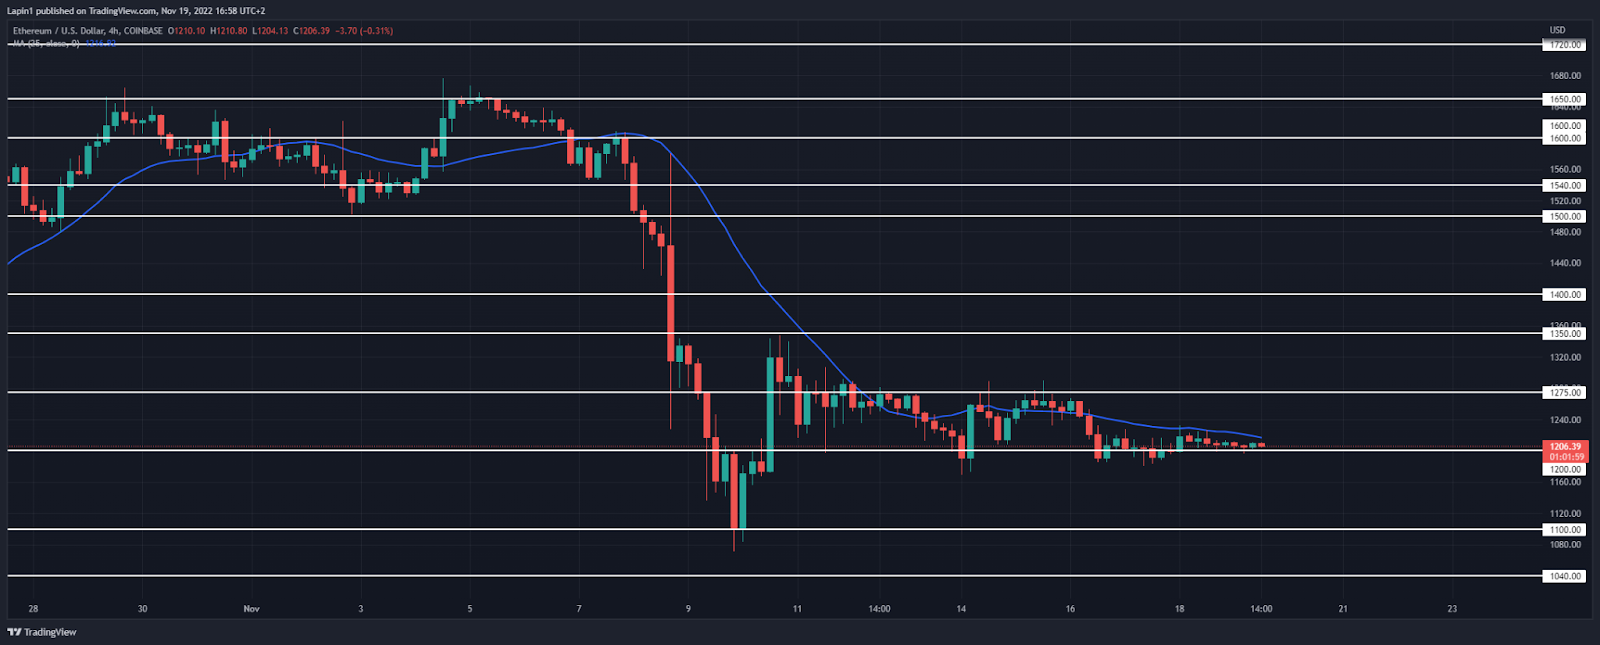 Ethereum price analysis: ETH continued sideways above $1,200, move higher overnight?